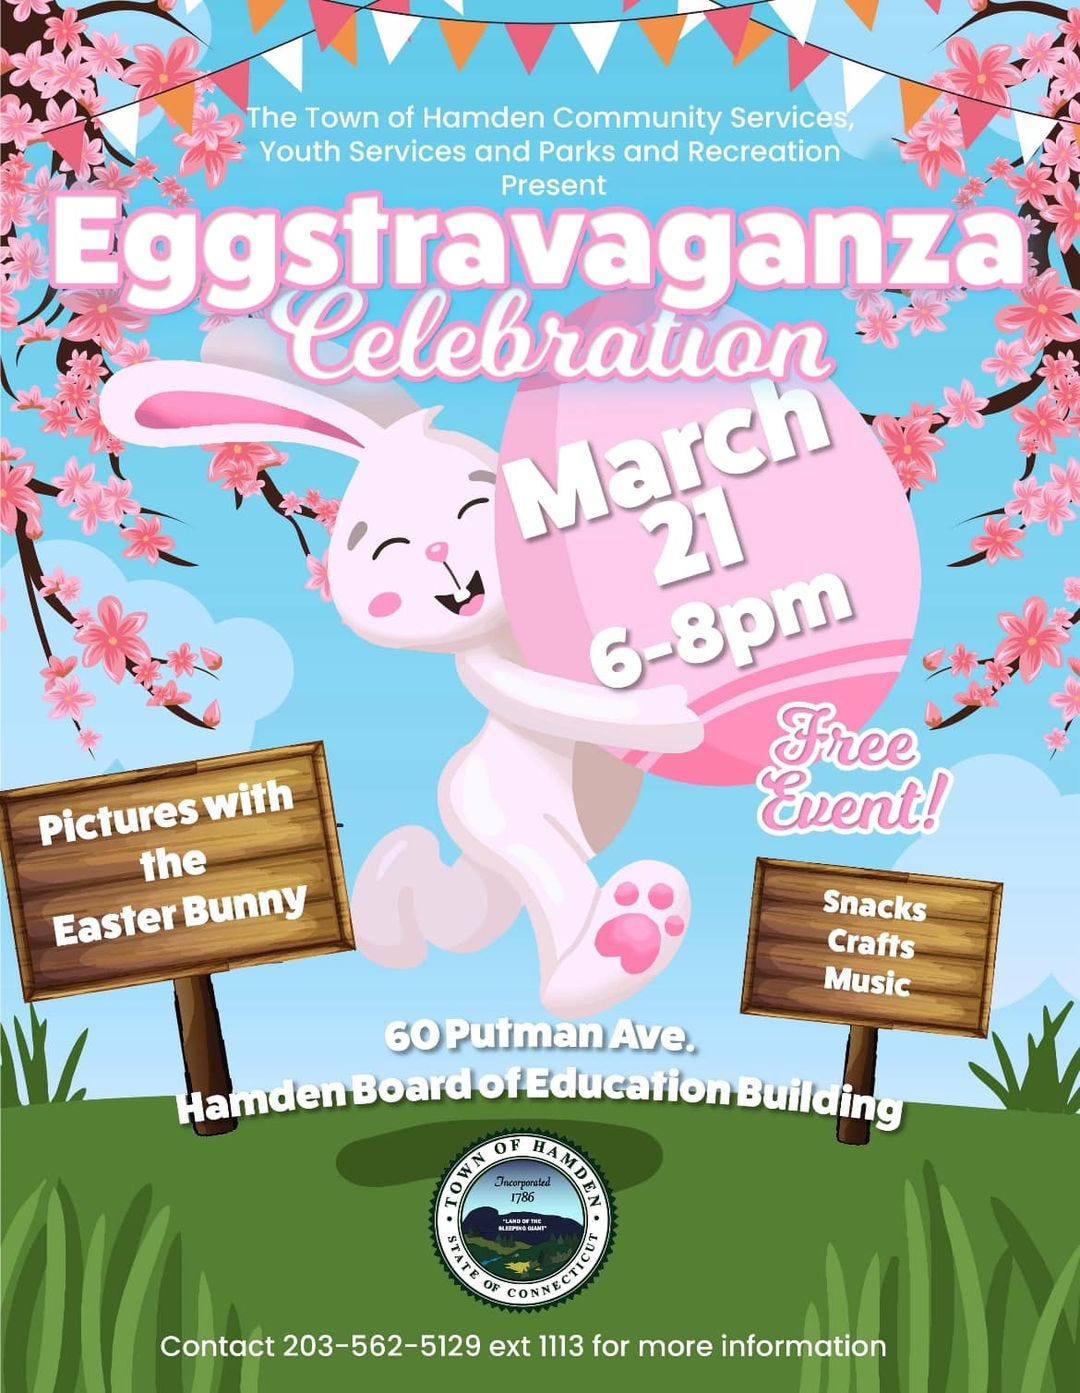 May be an image of text that says 'The Town of Hamden Community Services, Youth Services and Parks and Recreation Eggstravaganza Present Celebration March 21 6-8pm Free Event! Pictures with the Easter Bunny Snacks Crafts Music 60 Putman Ave. HamdenBoardofEducationBuling Contact 203-562-5129 ext 1113 for more information'